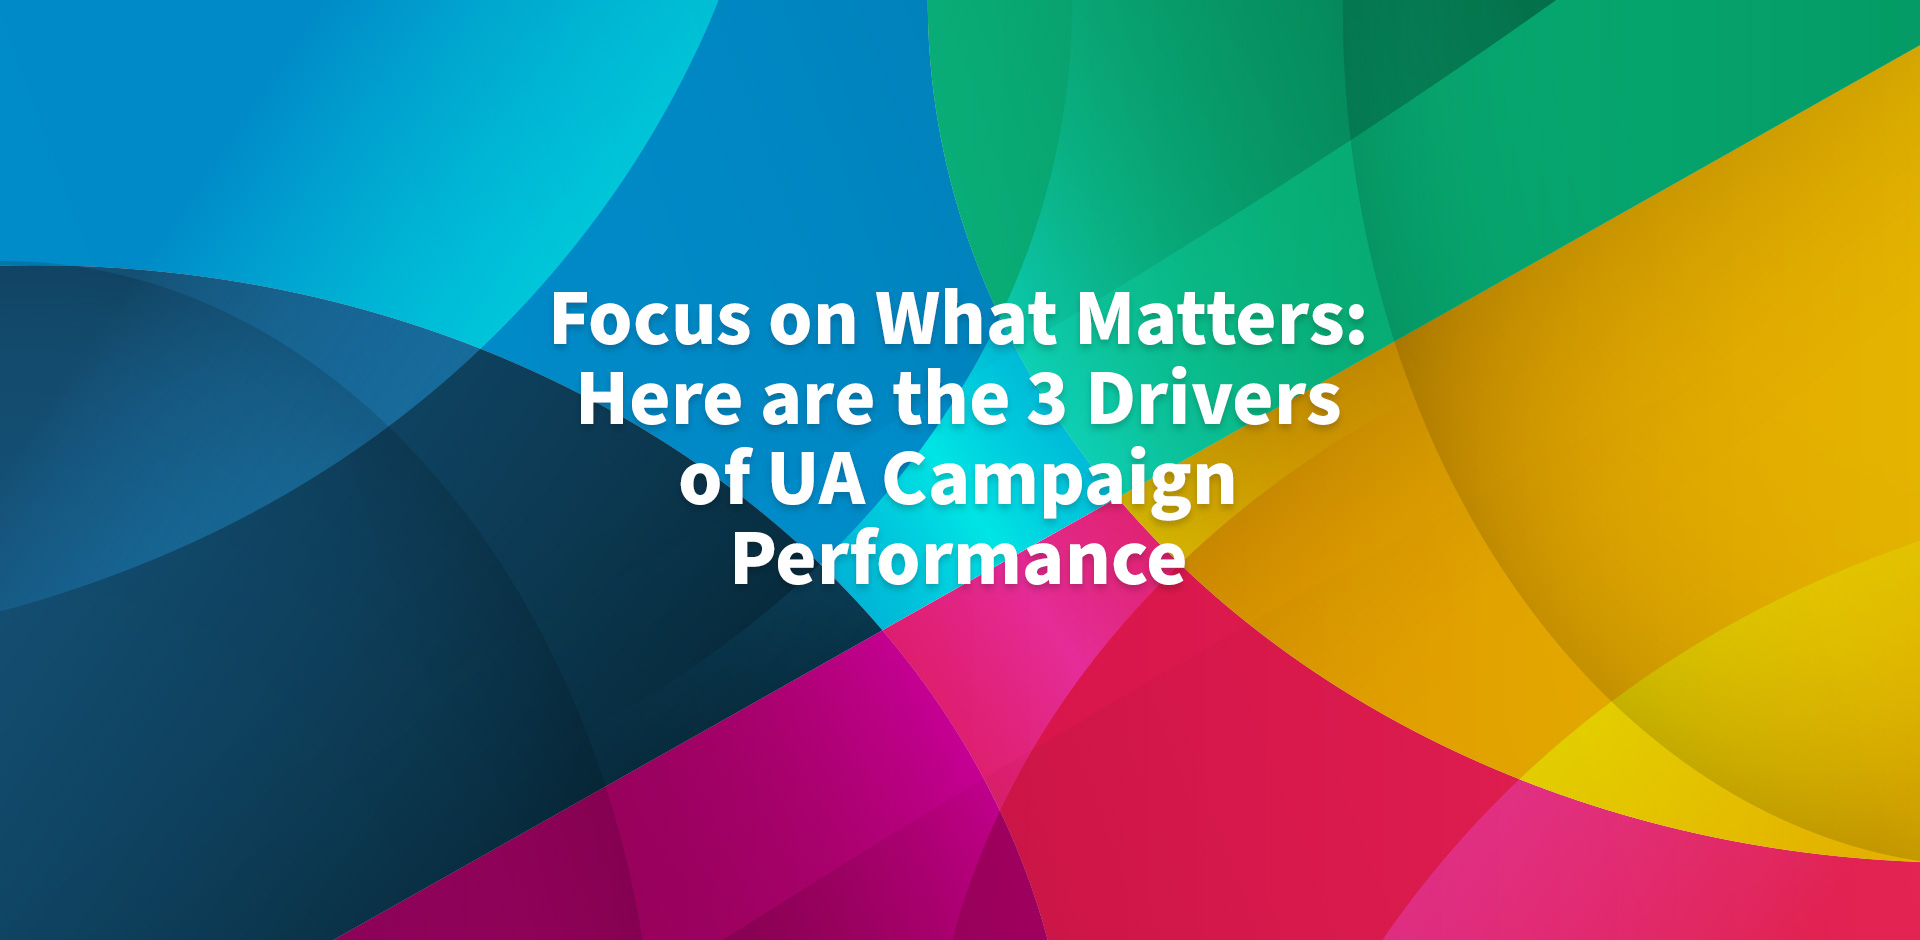 Focus on What Matters: Here are the 3 Drivers of UA Campaign Performance